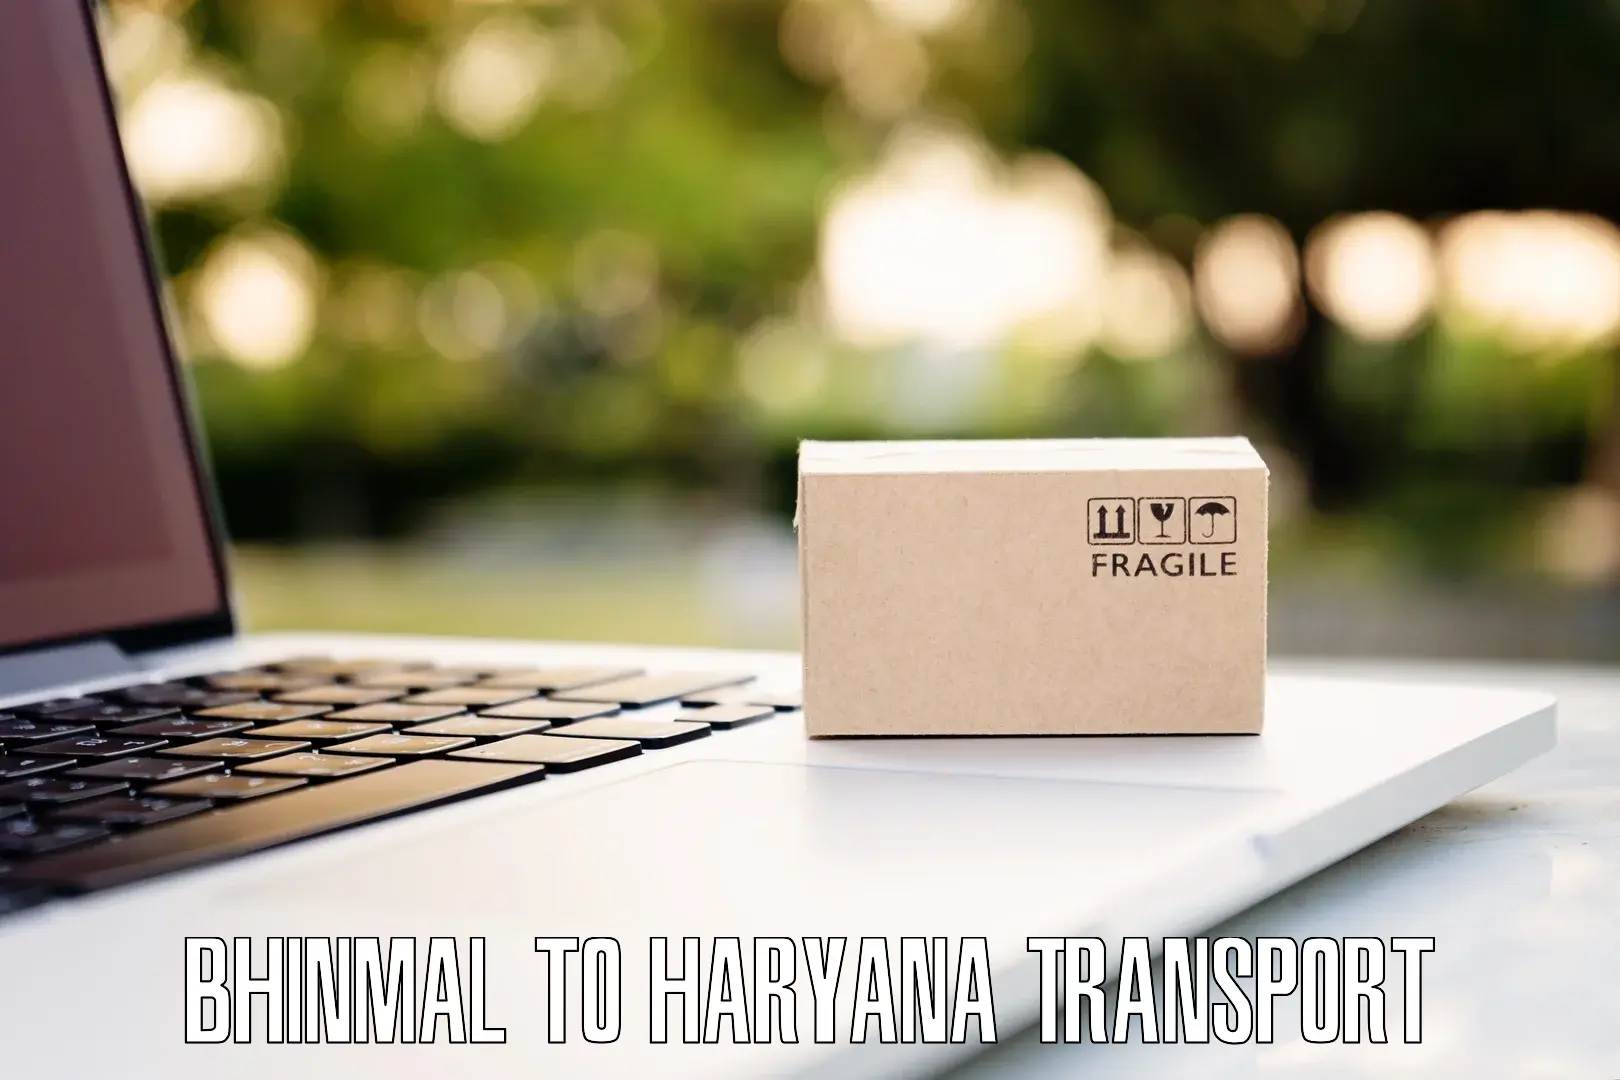 Nationwide transport services Bhinmal to Haryana